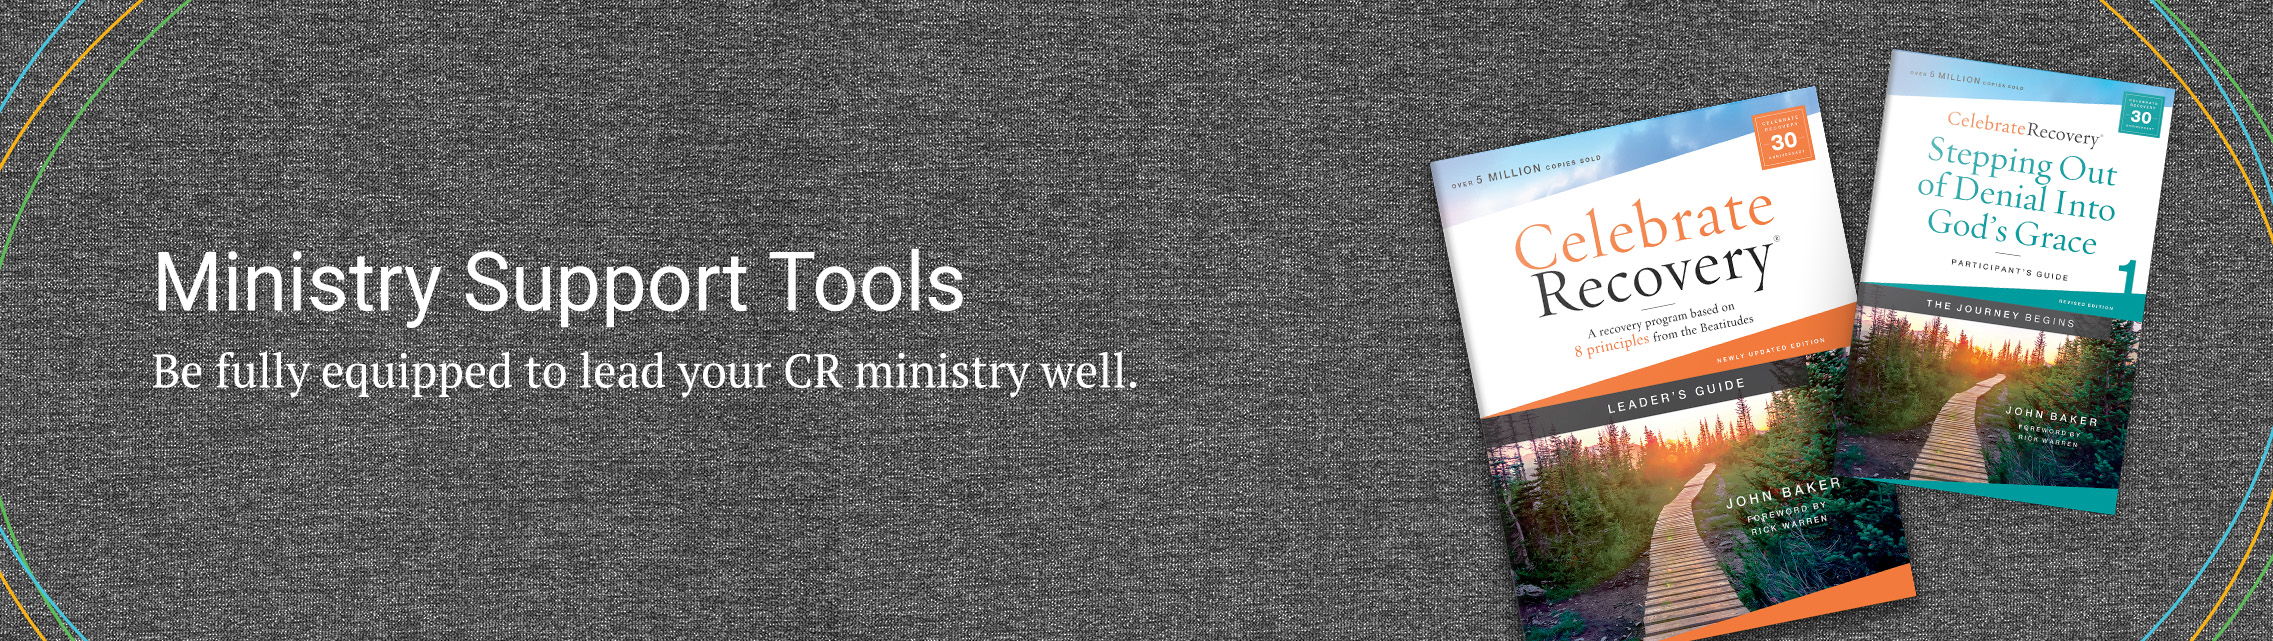 Ministry Support Tools